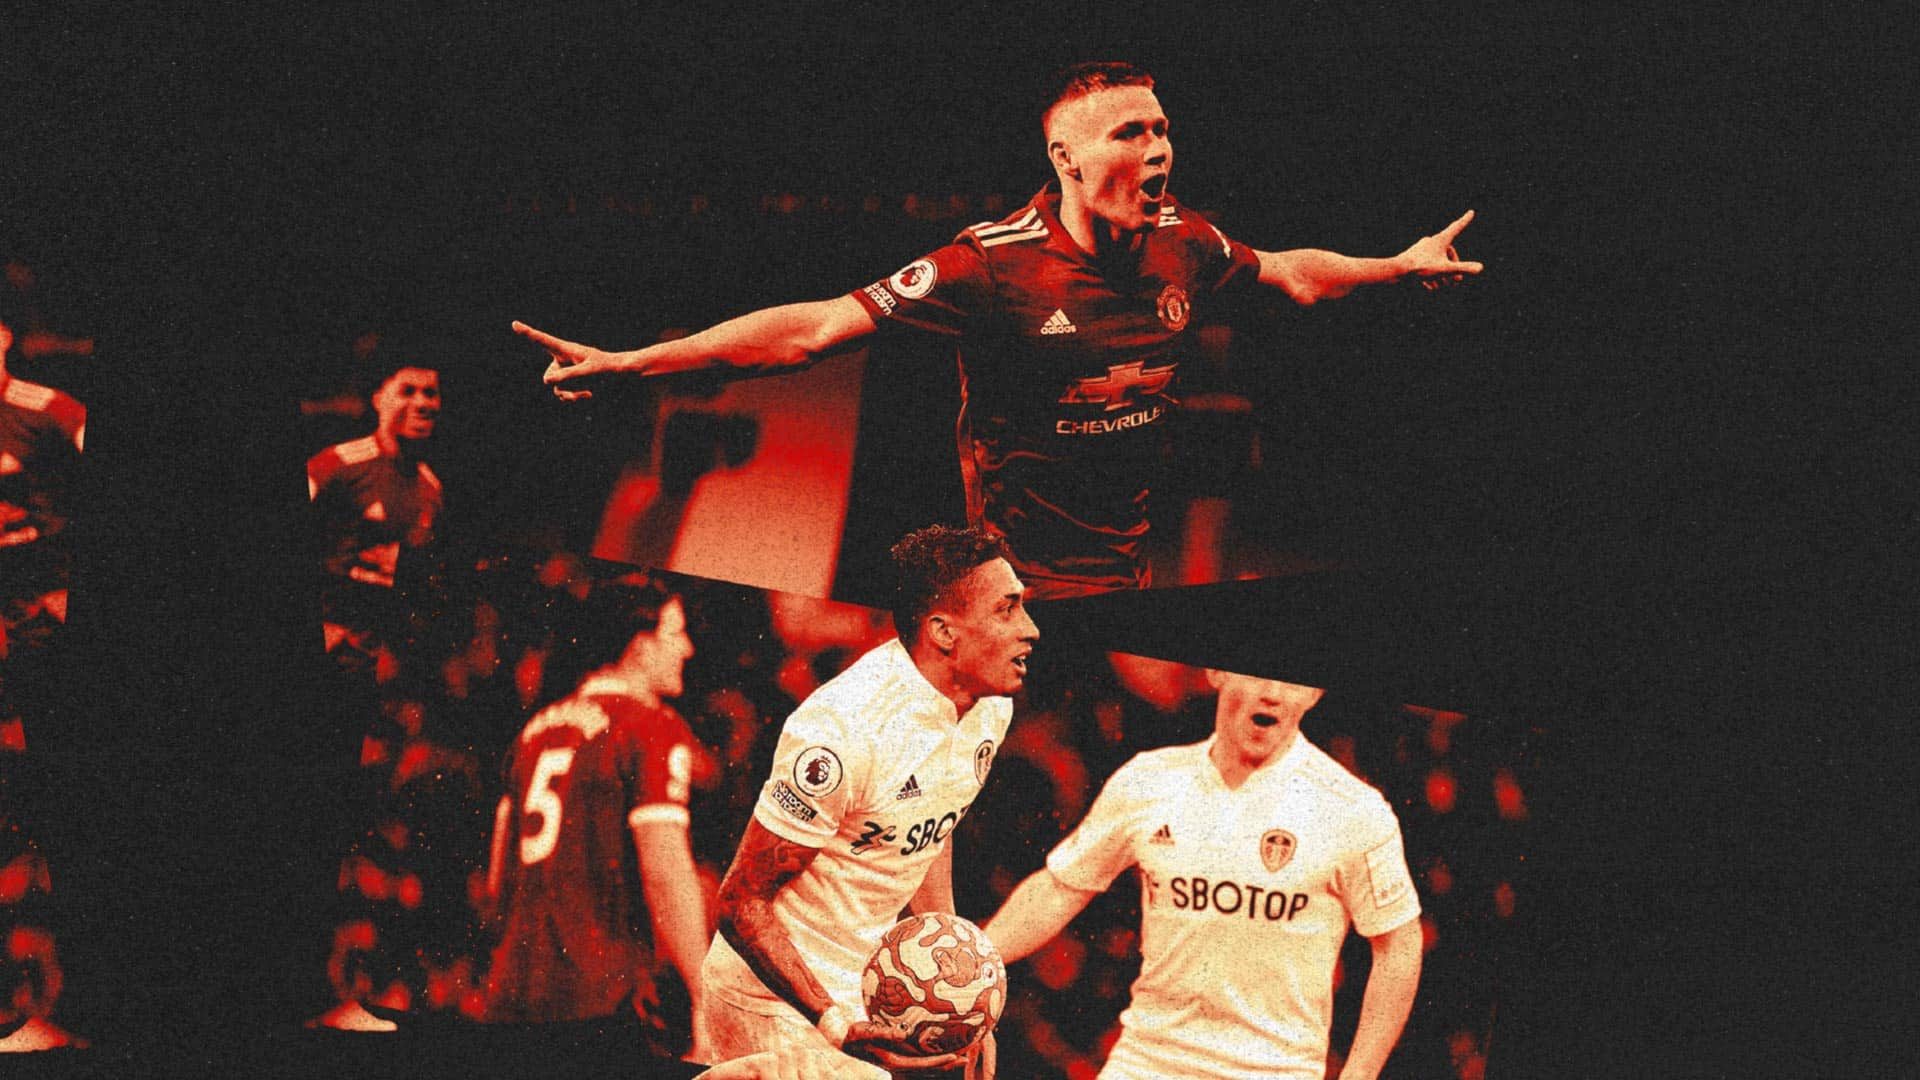 A collage of contrasting Leeds emotions against Scum — Scott McTominay's awful face, and Raphinha grabbing the ball after equalising at Elland Road